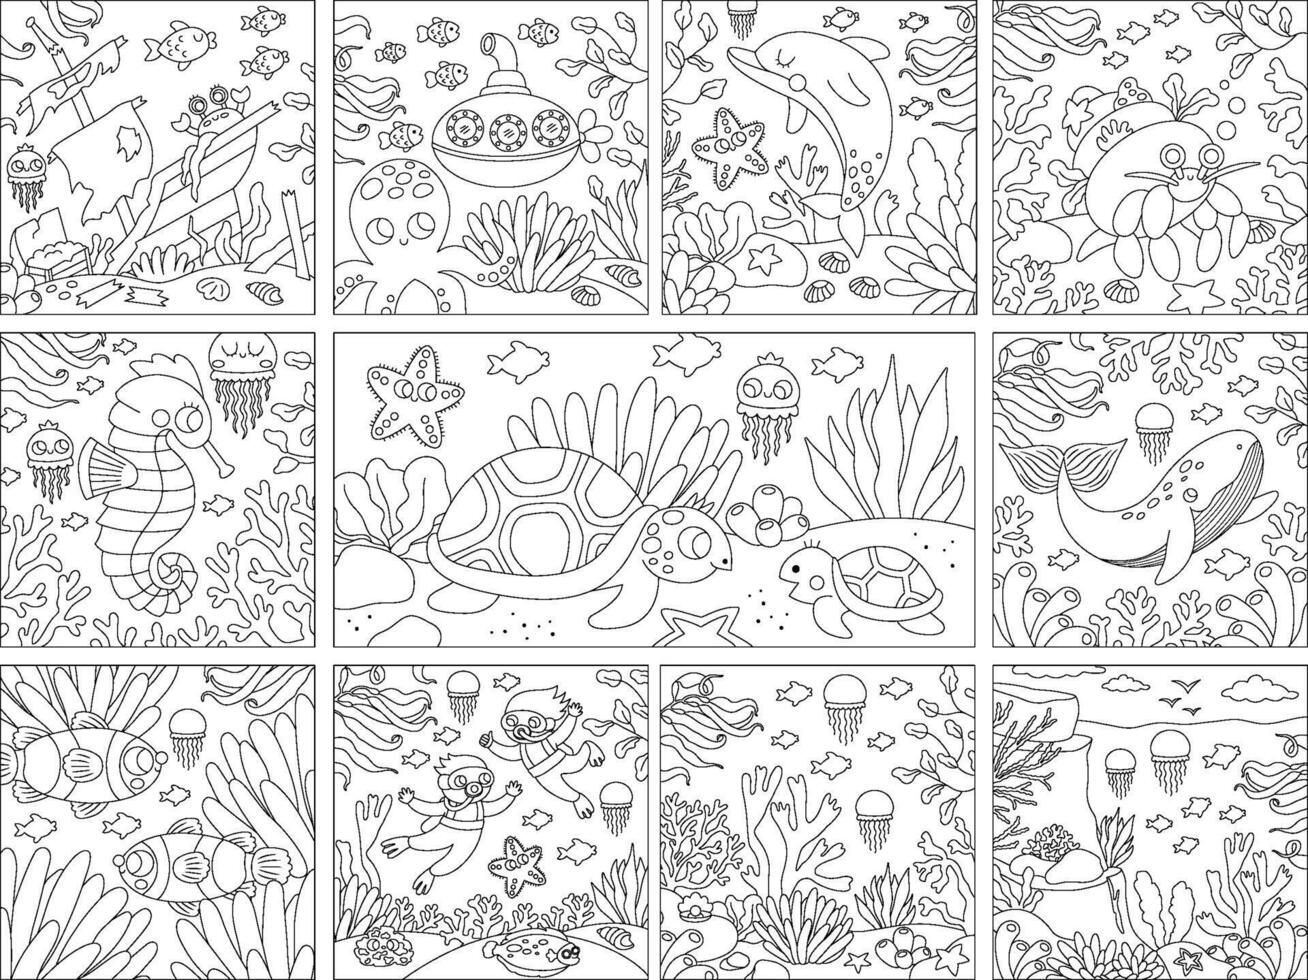 black and white under the sea square landscapes set. Ocean life line scenes collection with seaweeds, corals. Cute water nature backgrounds or coloring page with shipwreck, divers vector